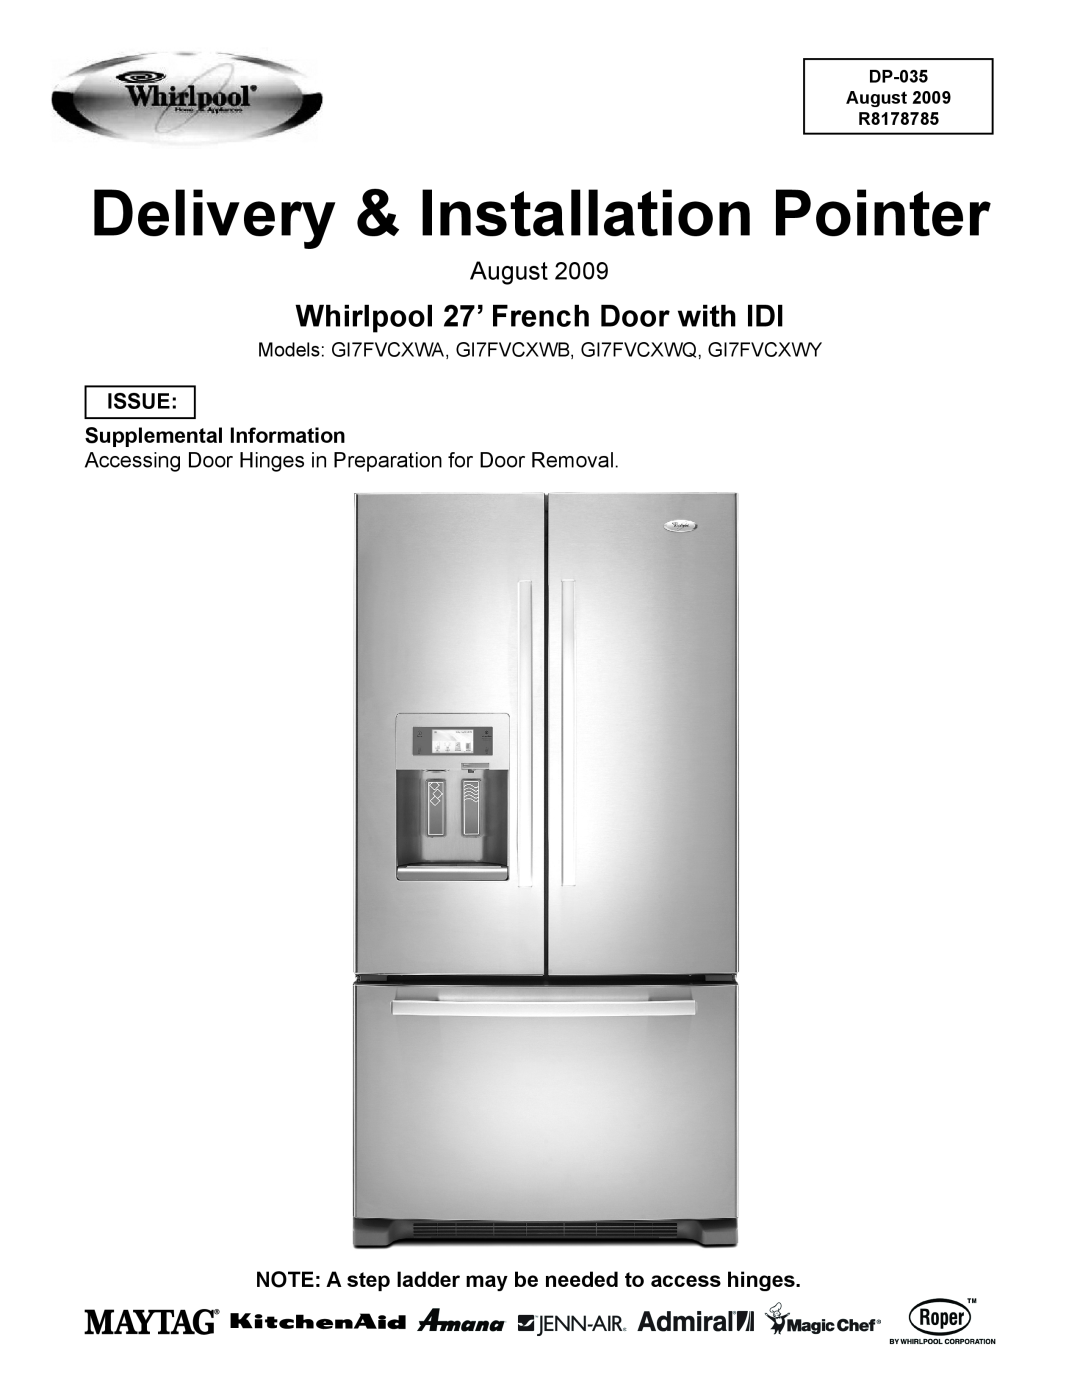 Whirlpool GI7FVCXWA manual Whirlpool 27’ French Door with IDI, August, Delivery & Installation Pointer 